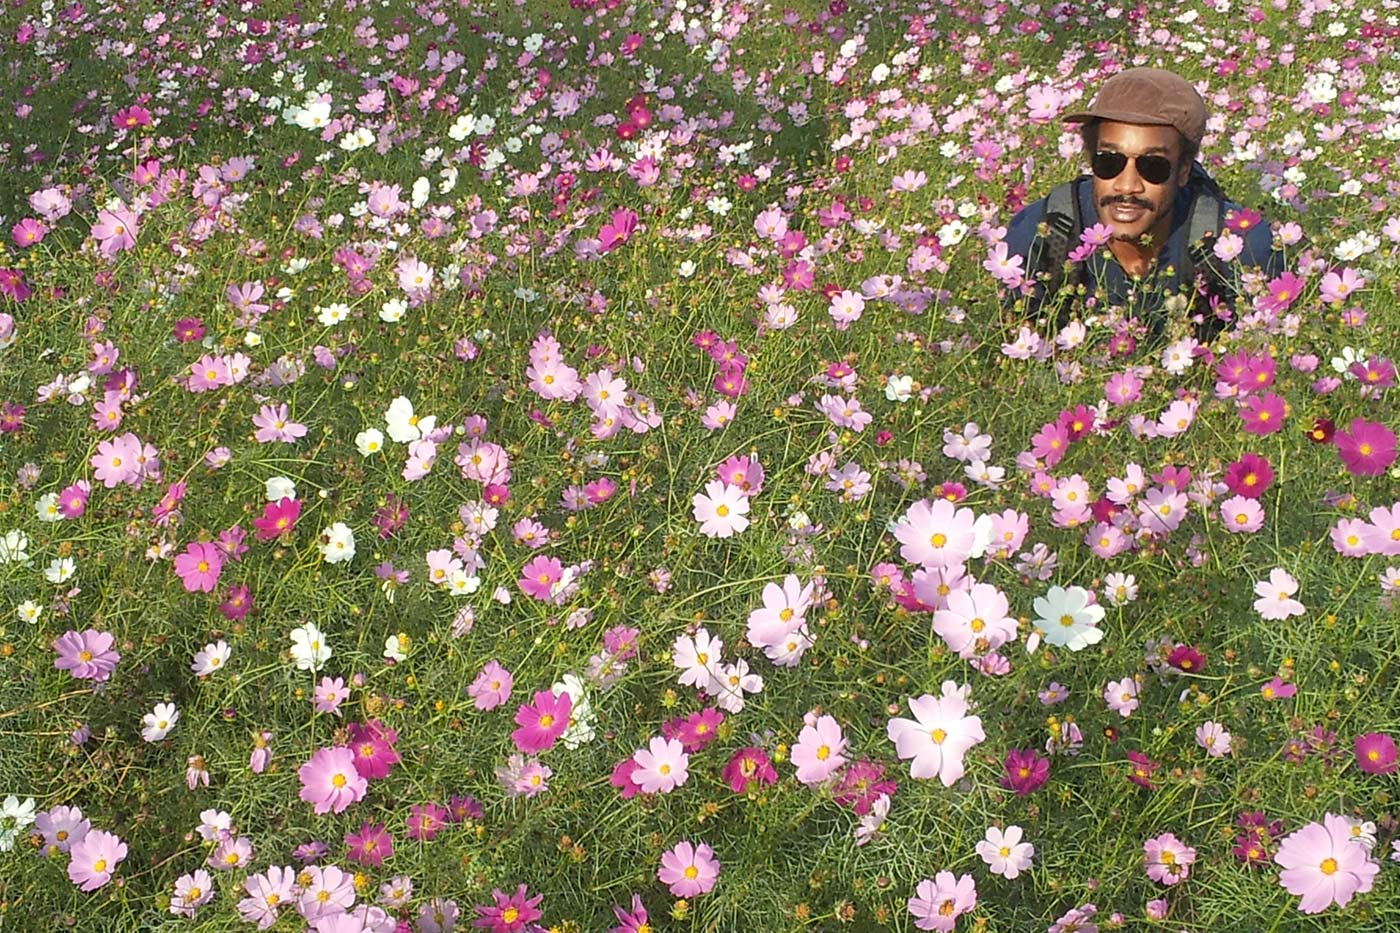 Kevin in flowers